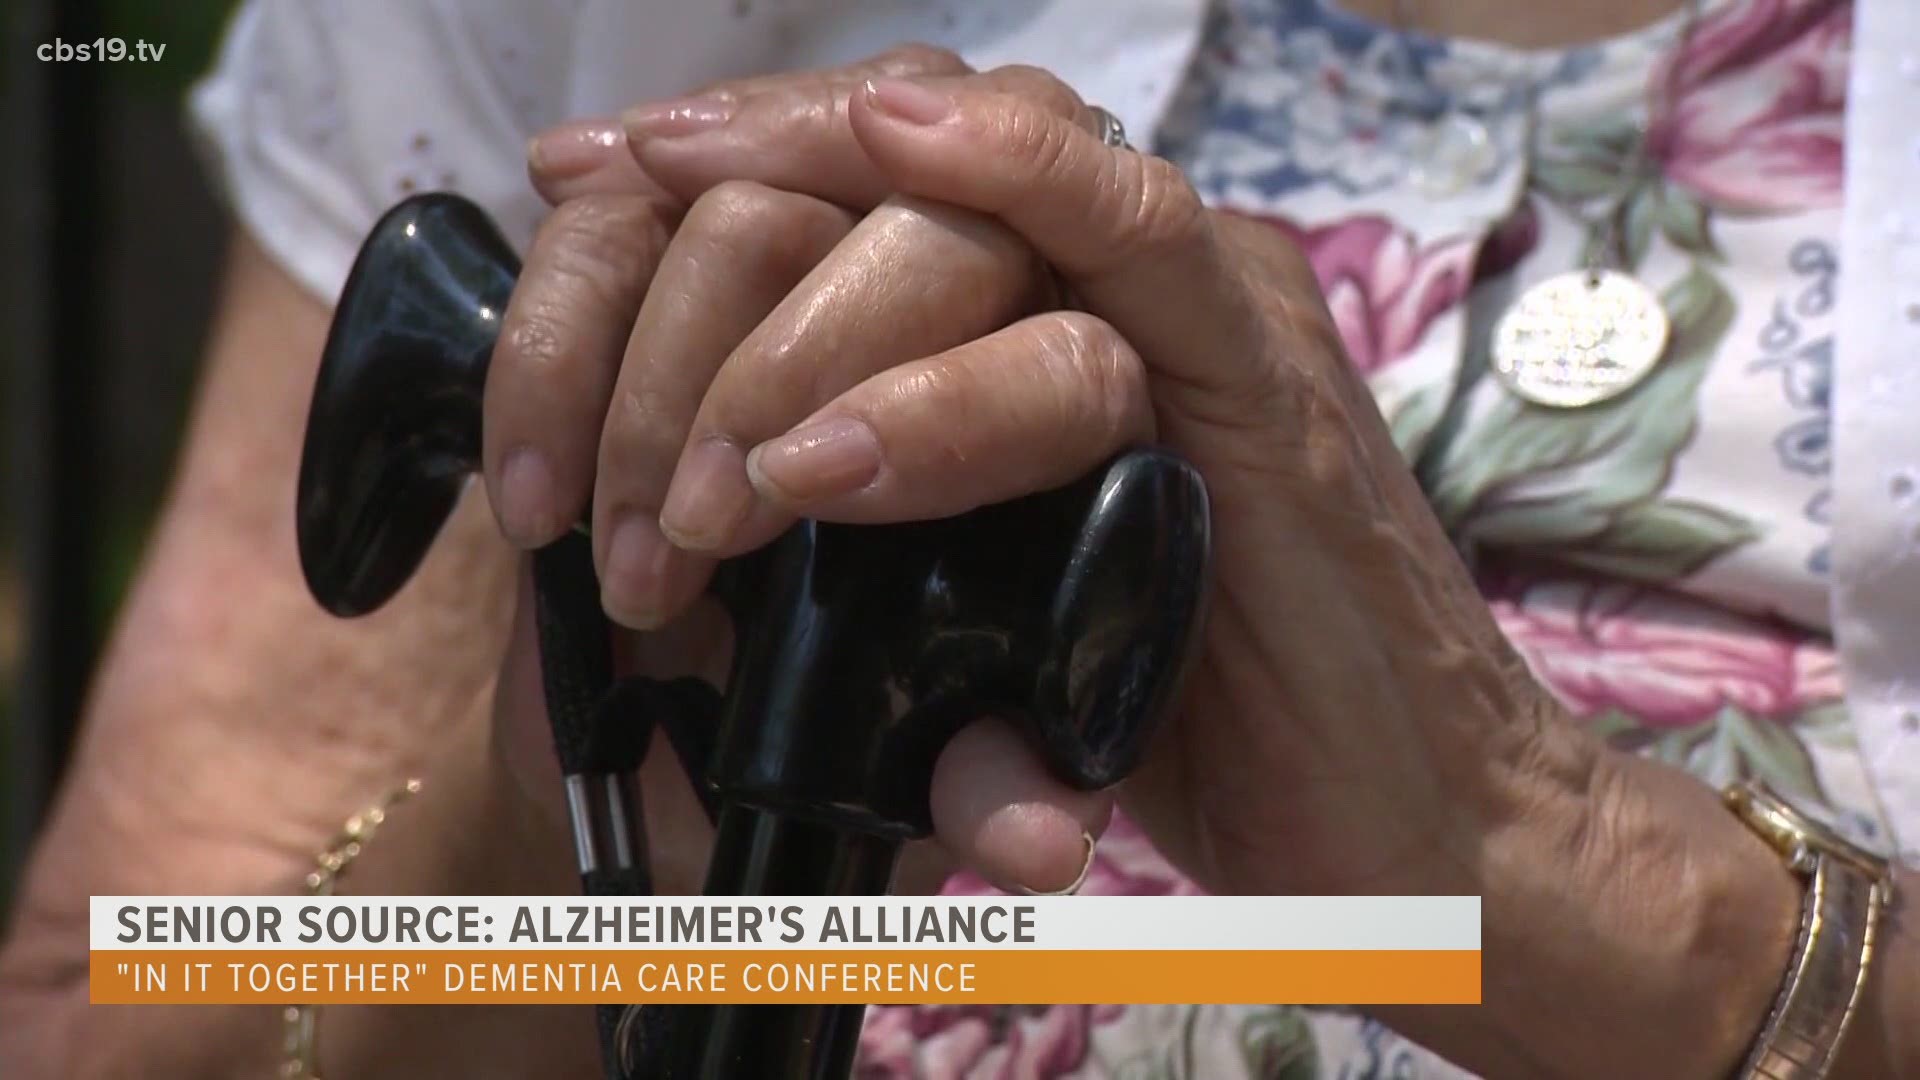 The Alzheimer's Alliance walks alongside East Texans during their journeys with Alzheimer's and other dementia related illnesses and helps caregivers find resources.